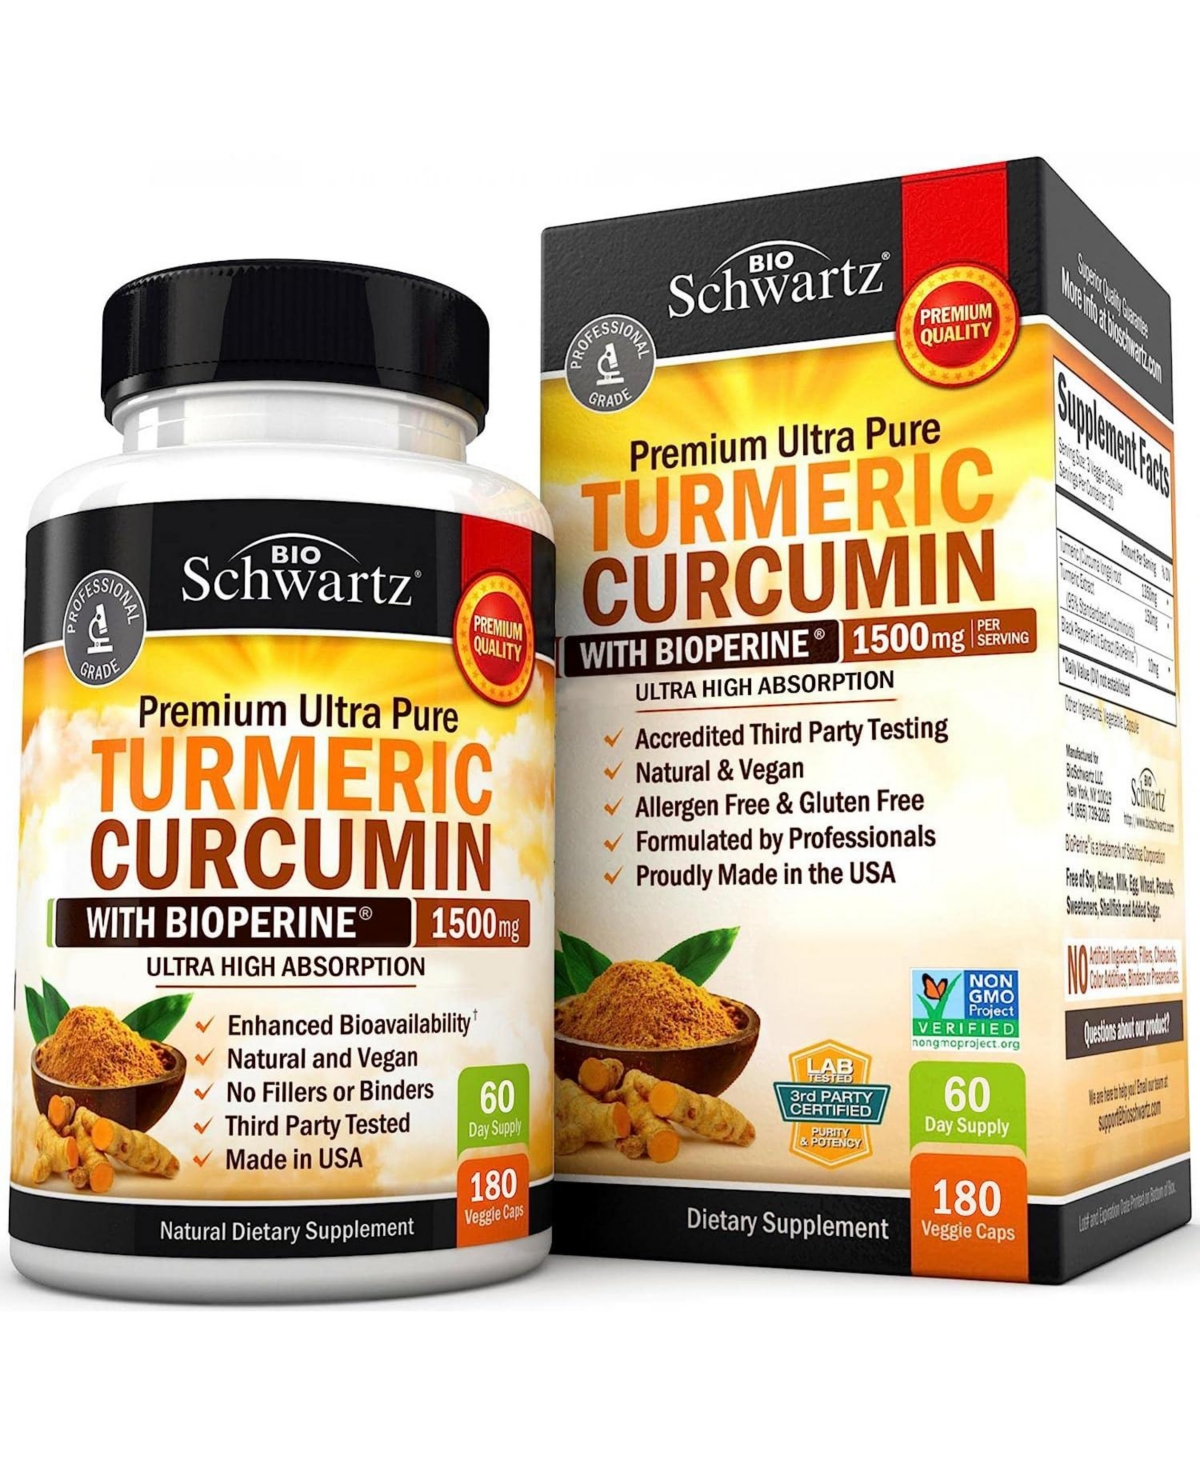 Turmeric Curcumin with BioPerine 1500mg - Natural Joint Support with 95% Standardized Curcuminoids & Black Pepper Extract for Ultra High A